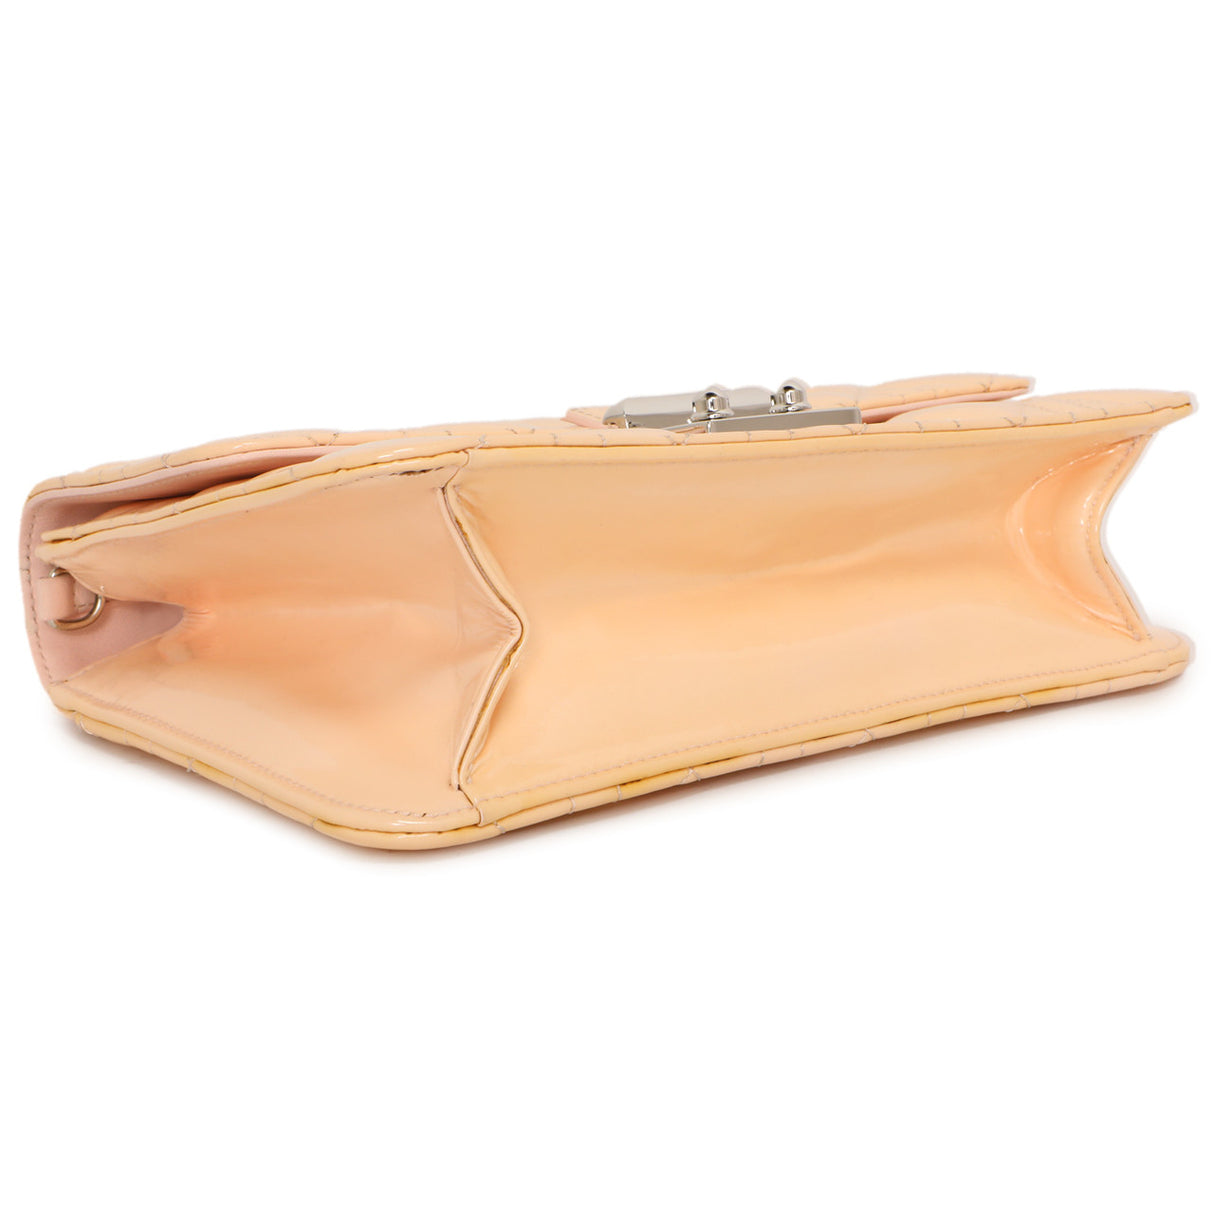 Christian Dior Pink Patent Cannage Miss Dior Promenade Pouch